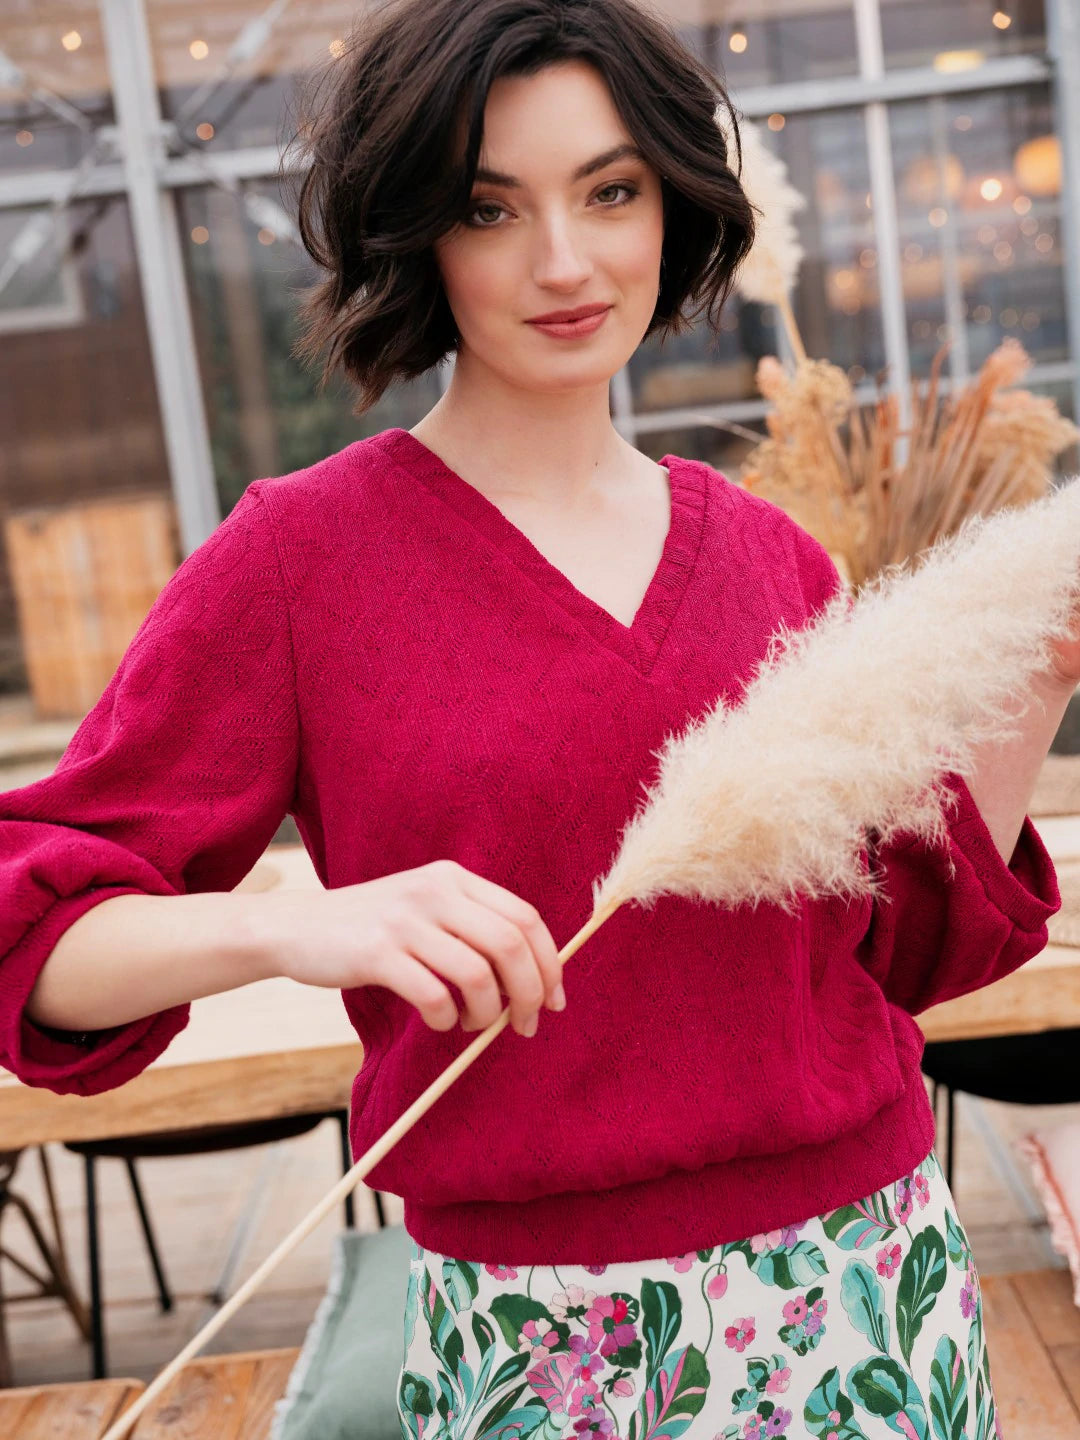 Atelier Jupe - Charlie Sweater Sewing Pattern